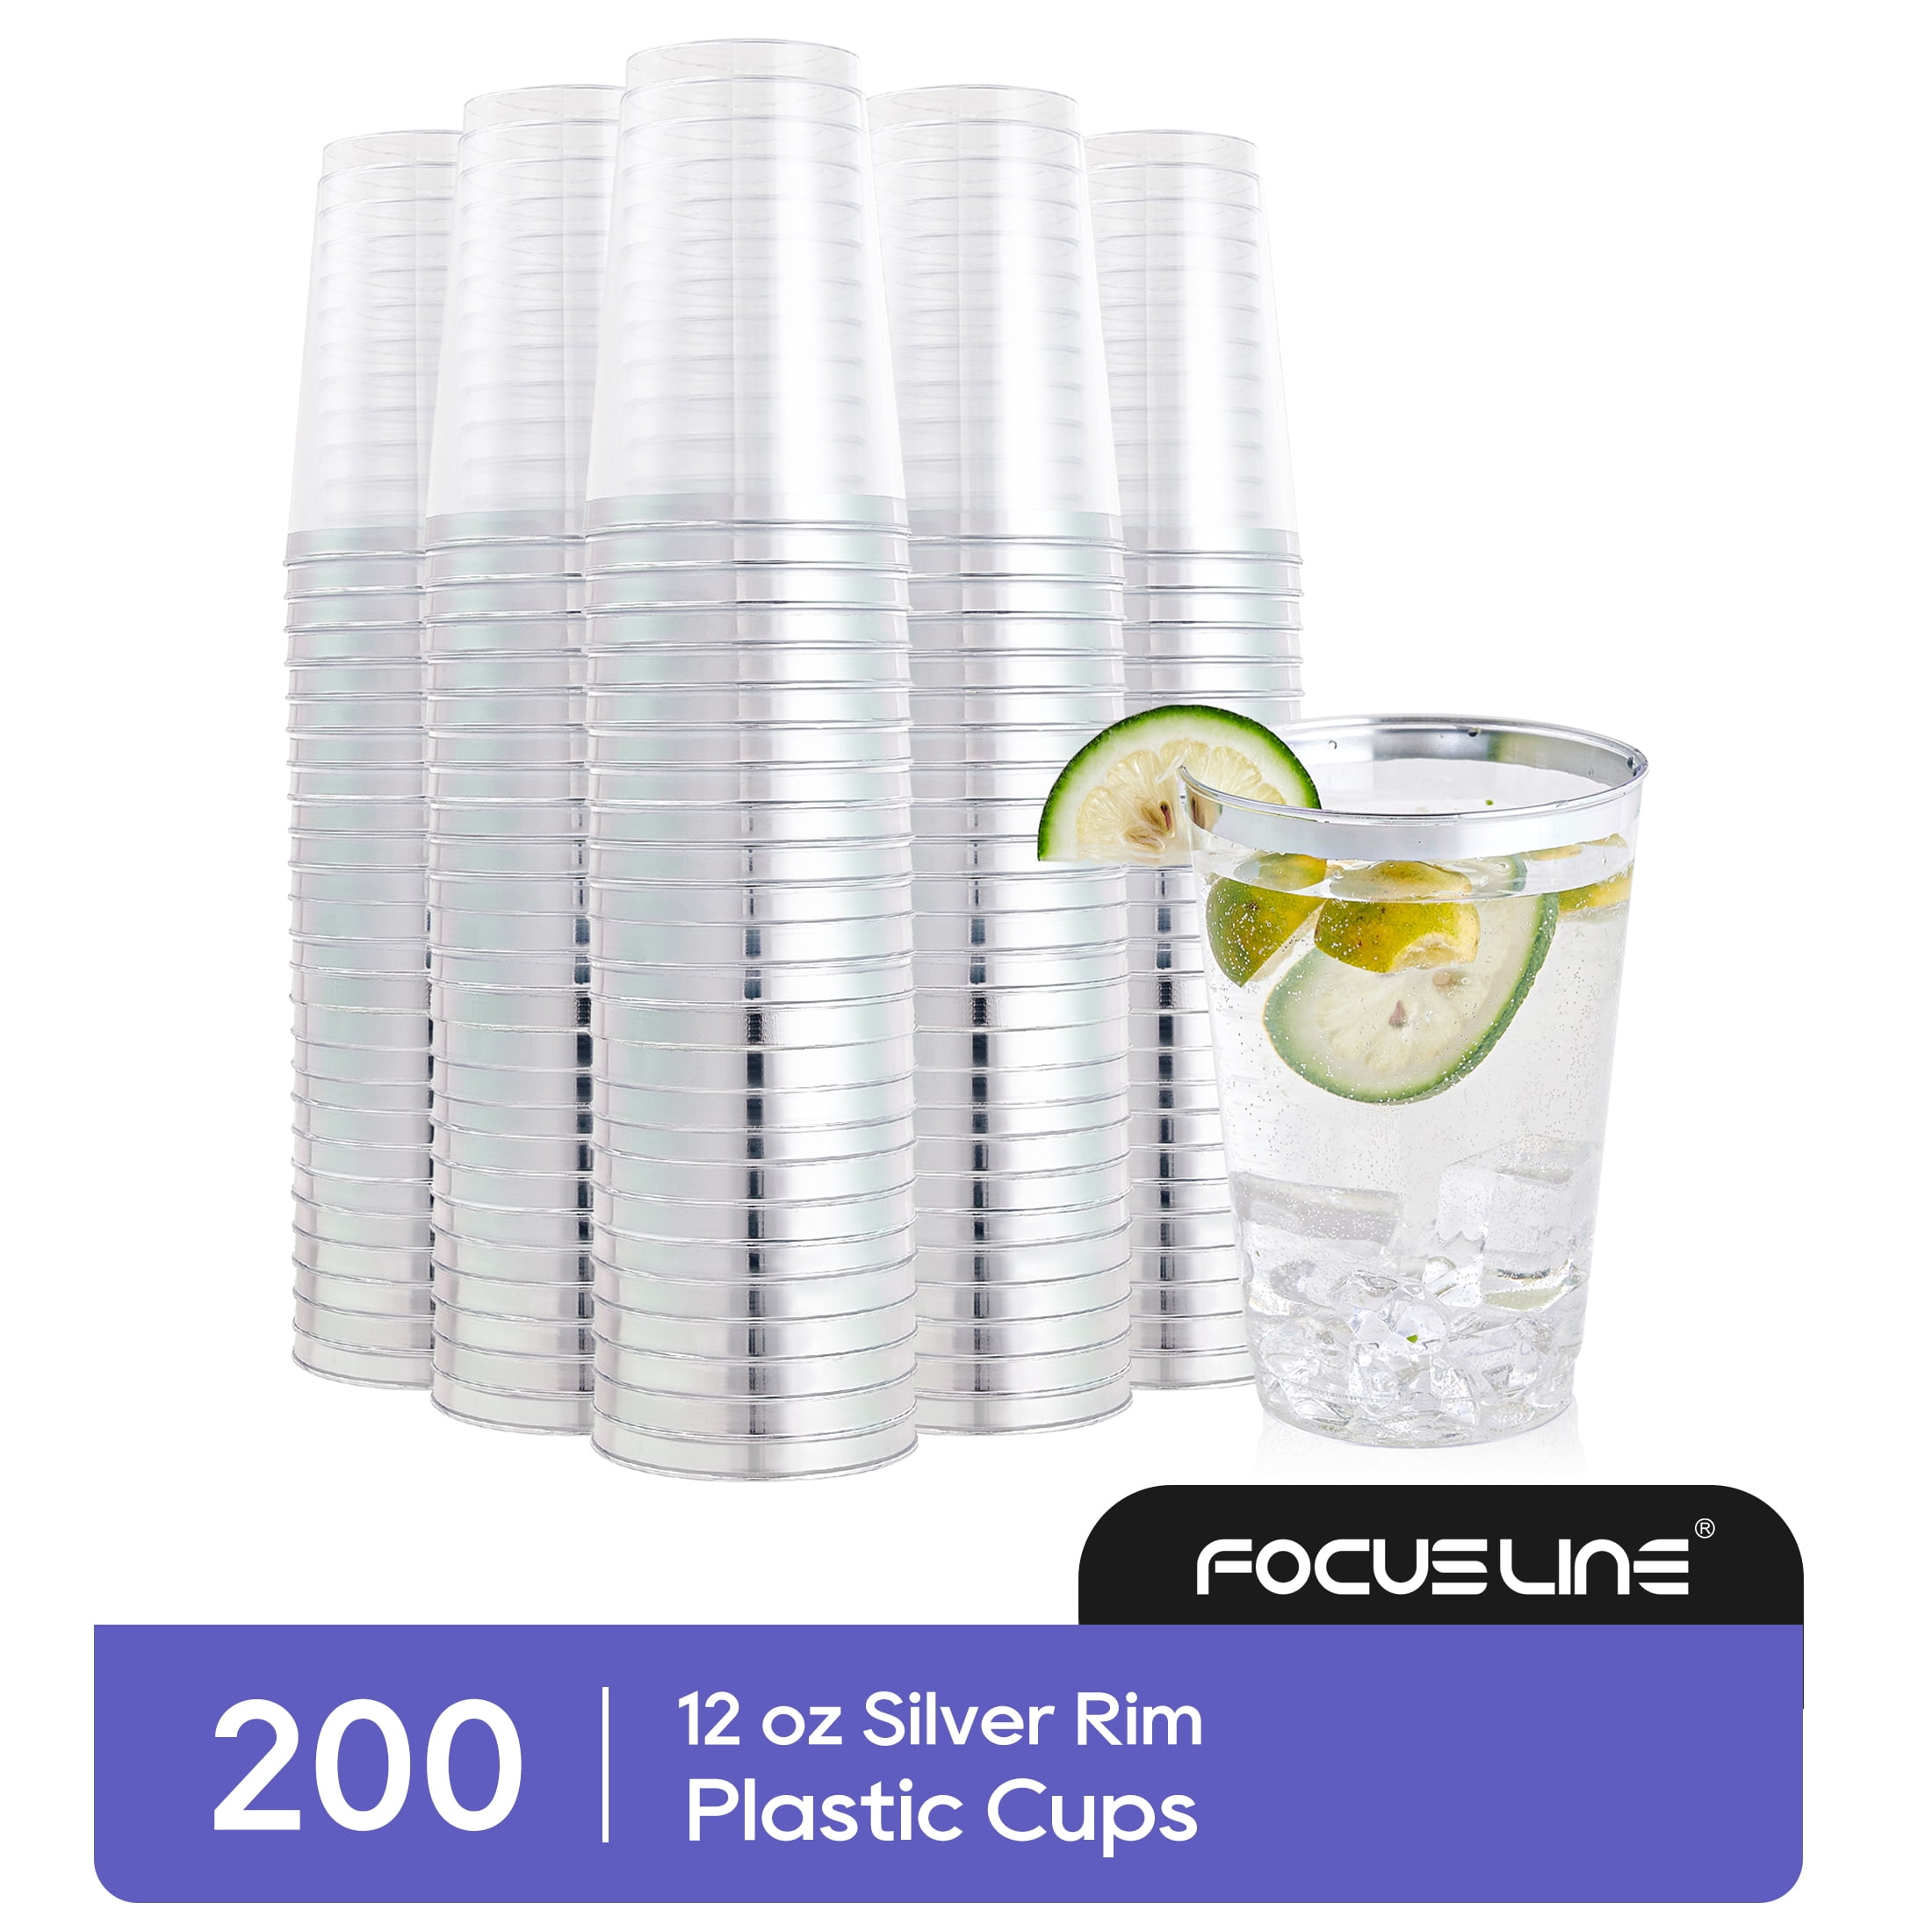 RW Base 16-oz Gray Plastic Party Cup - 3 3/4 x 3 3/4 x 4 3/4 - 500 count  box